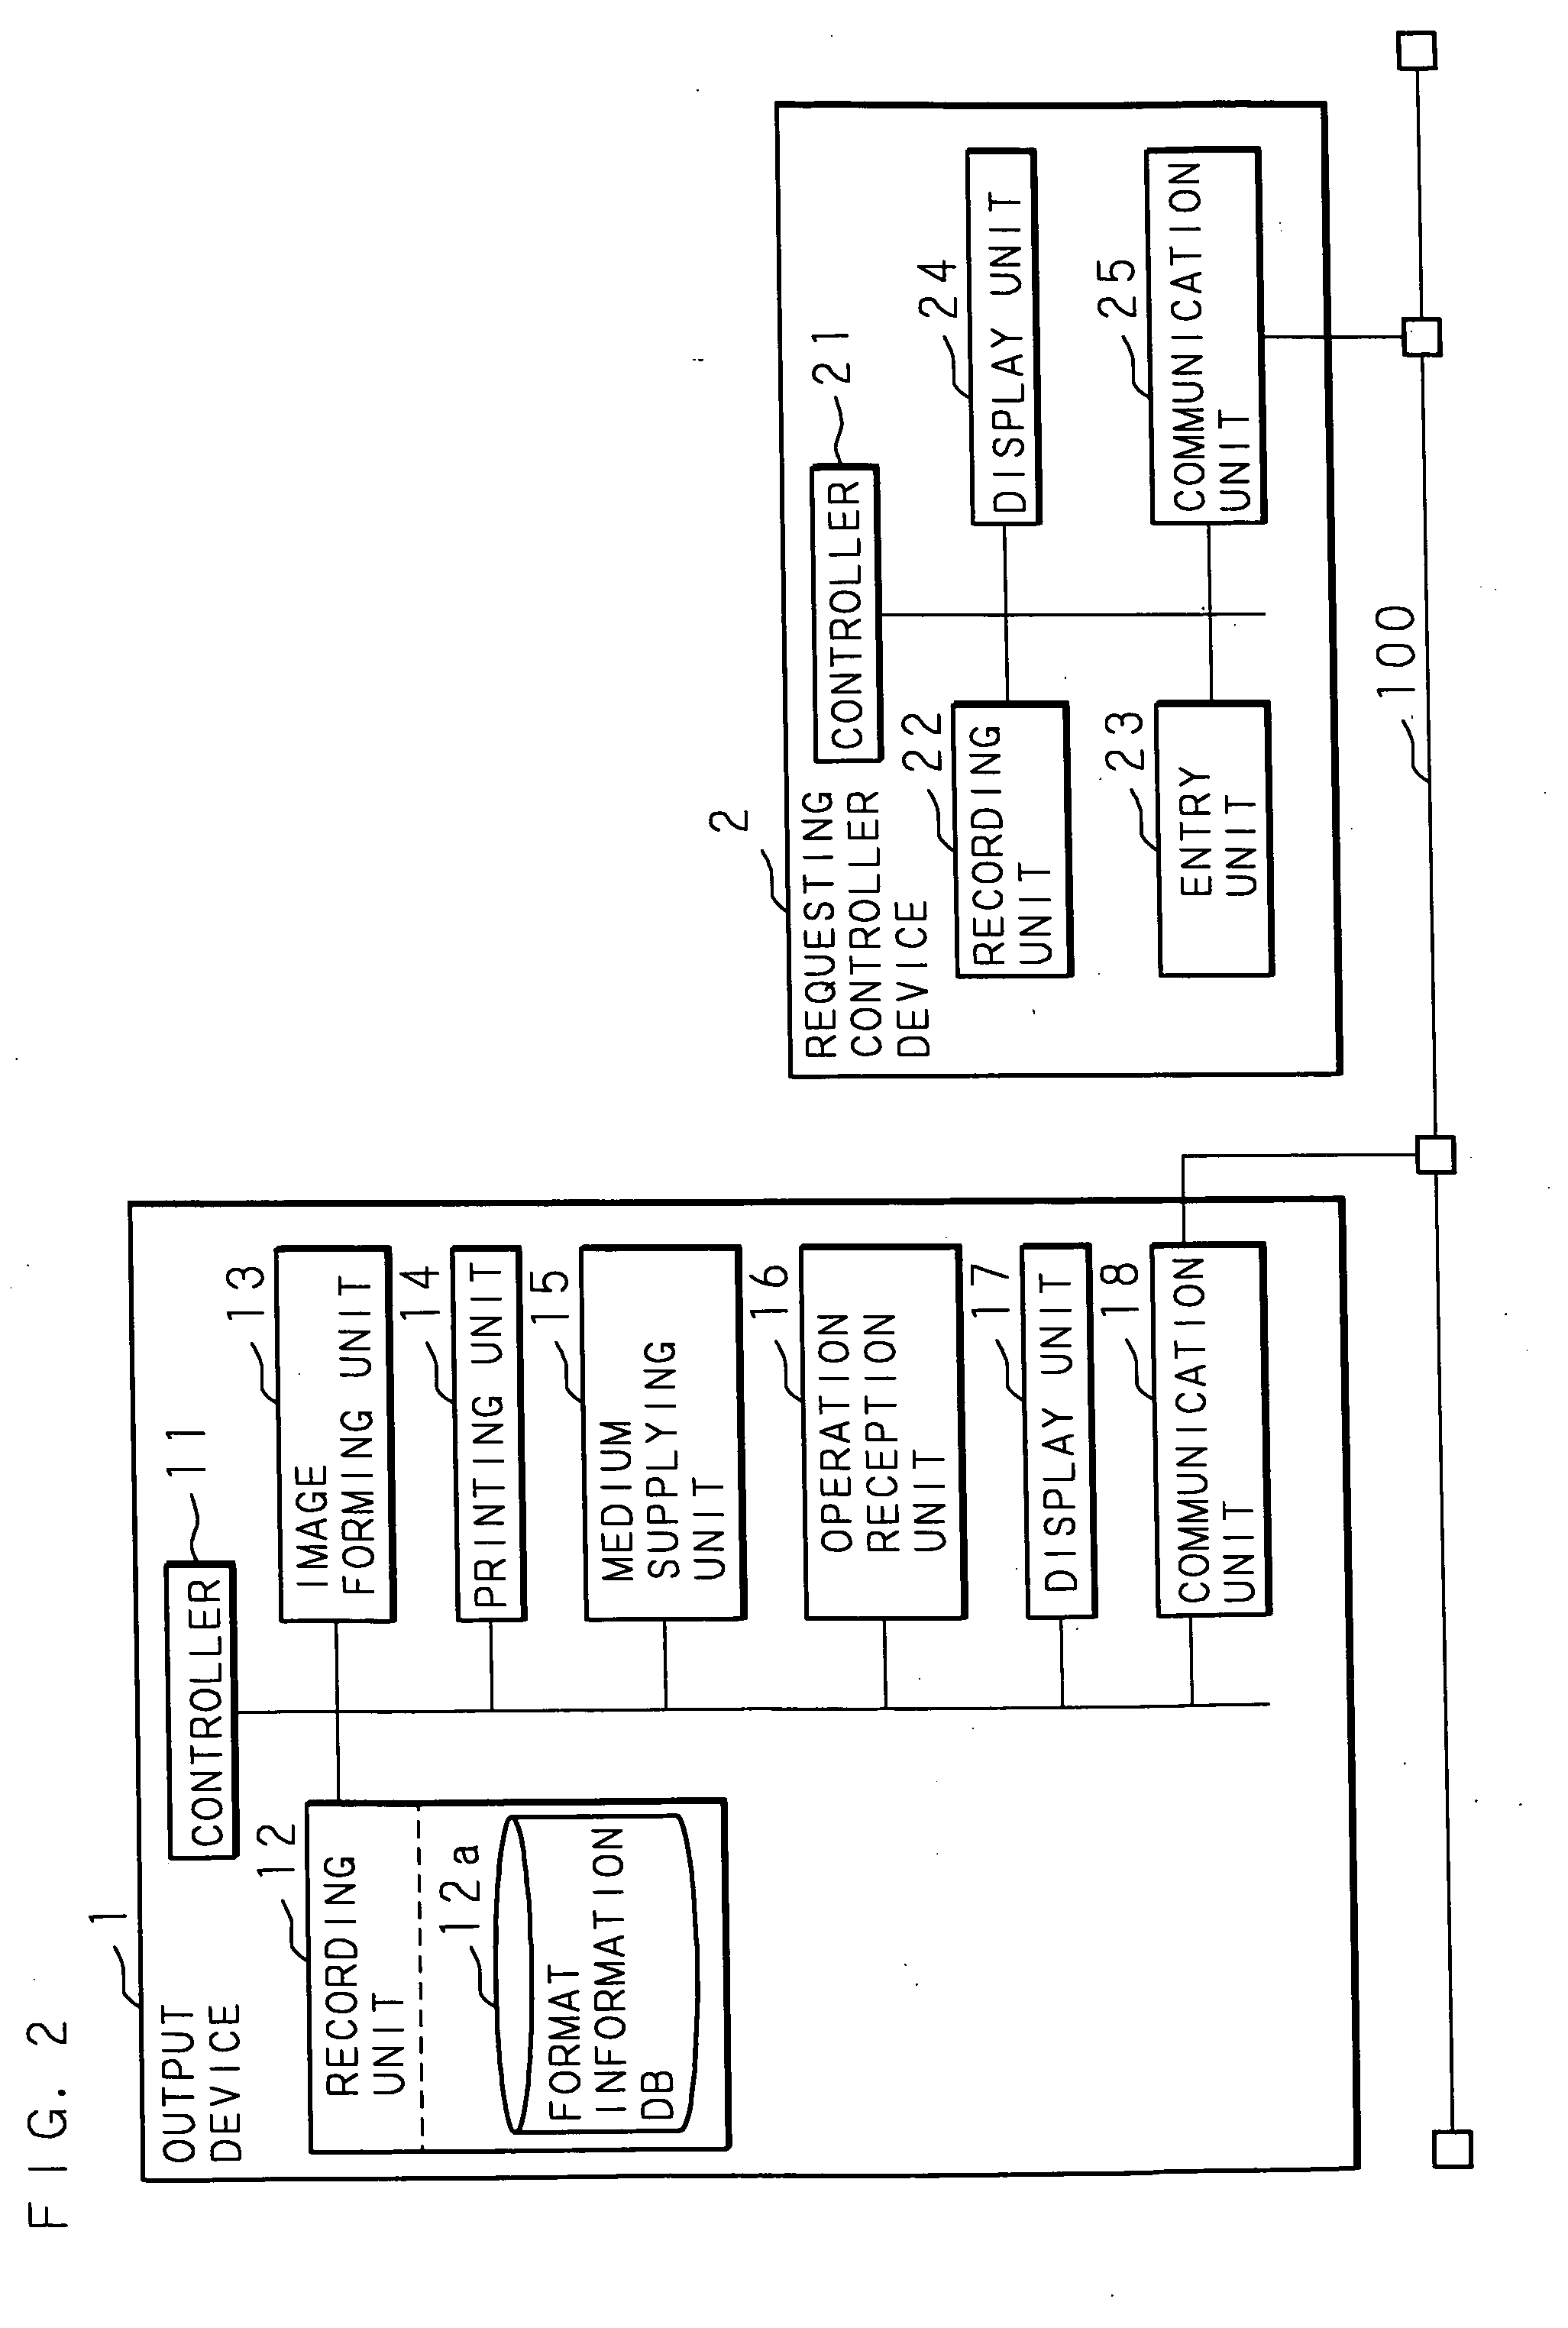 Output system and output device